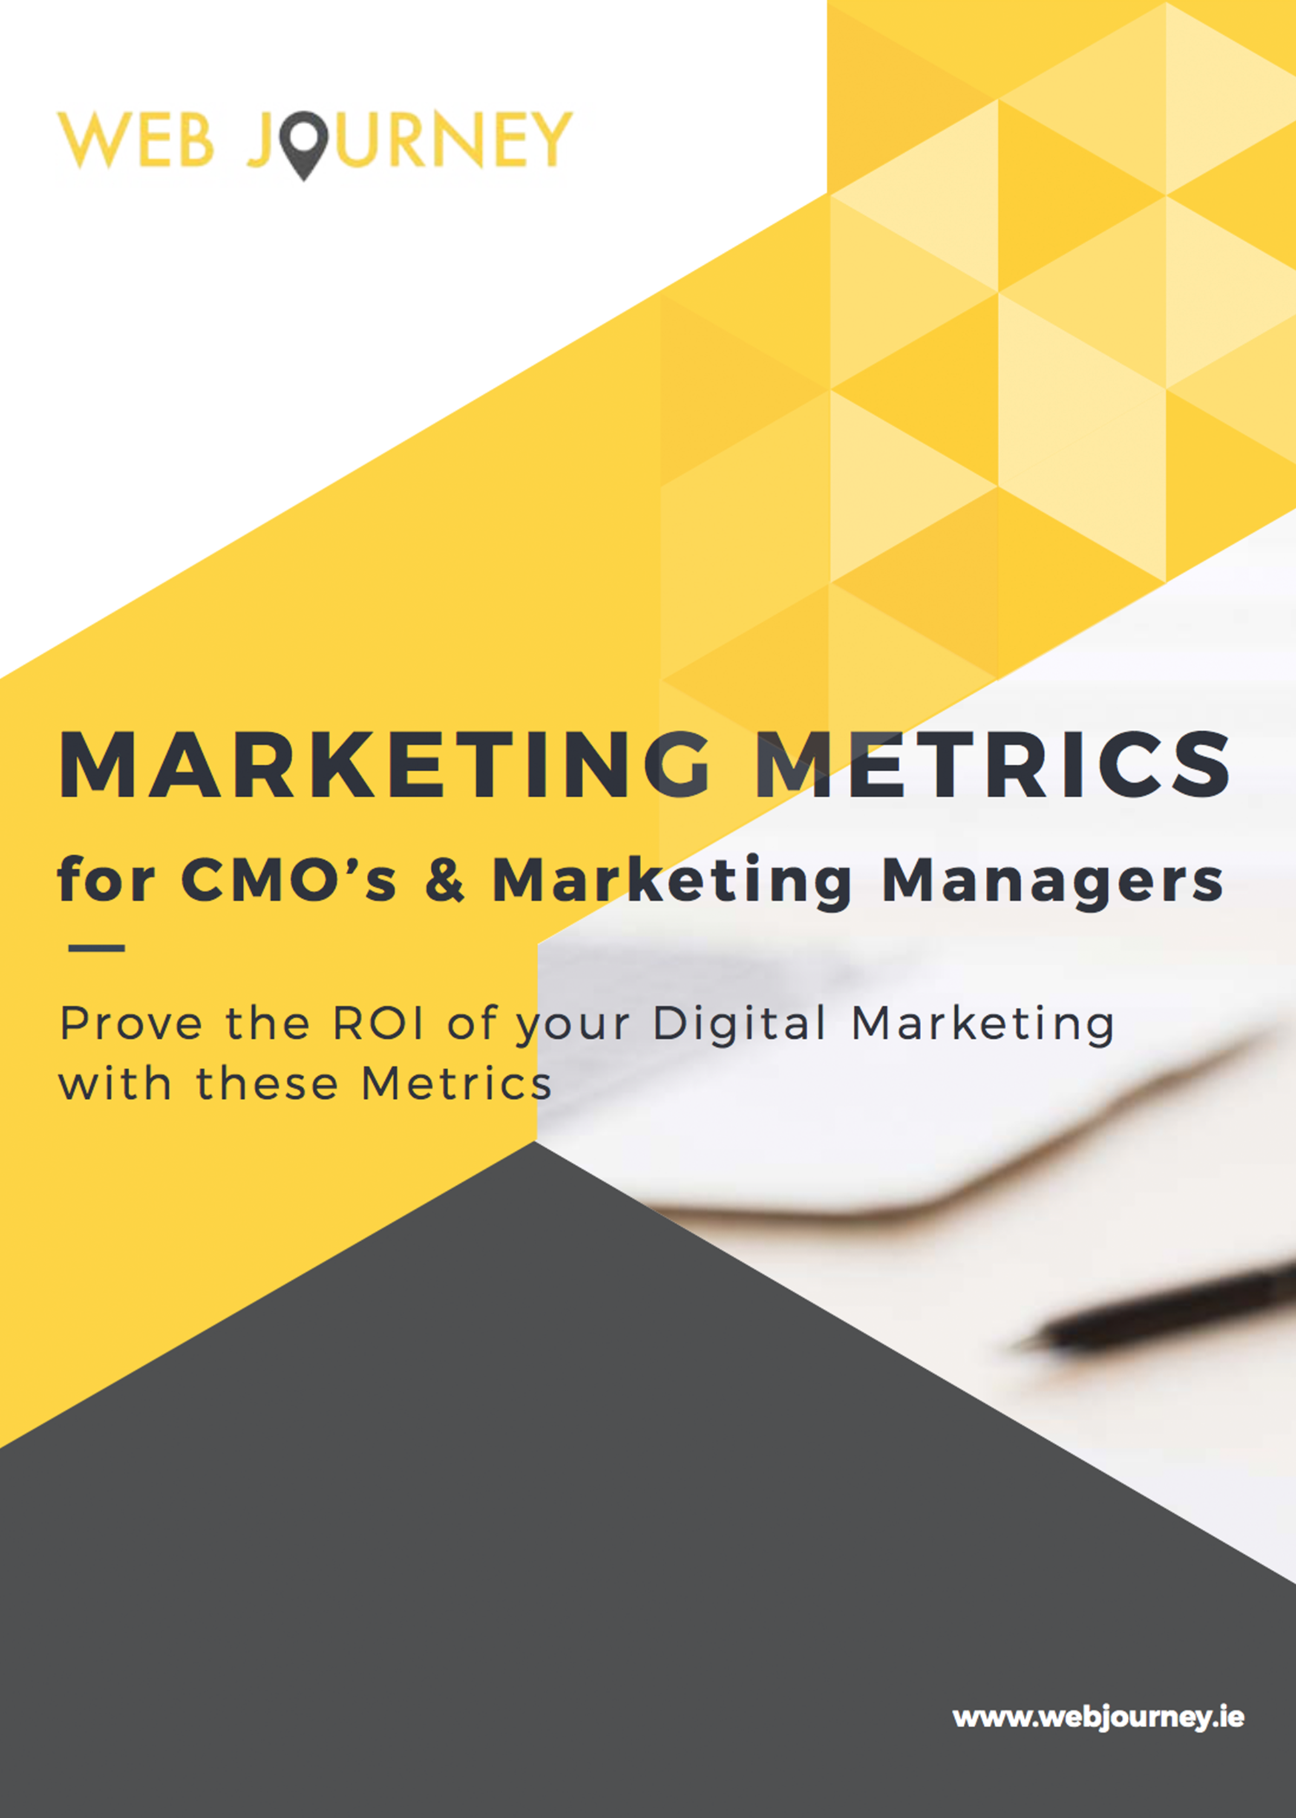 Marketing-Metrics-for-CMOs-and-Marketing-Managers-LP-Image-Feb-2018.png